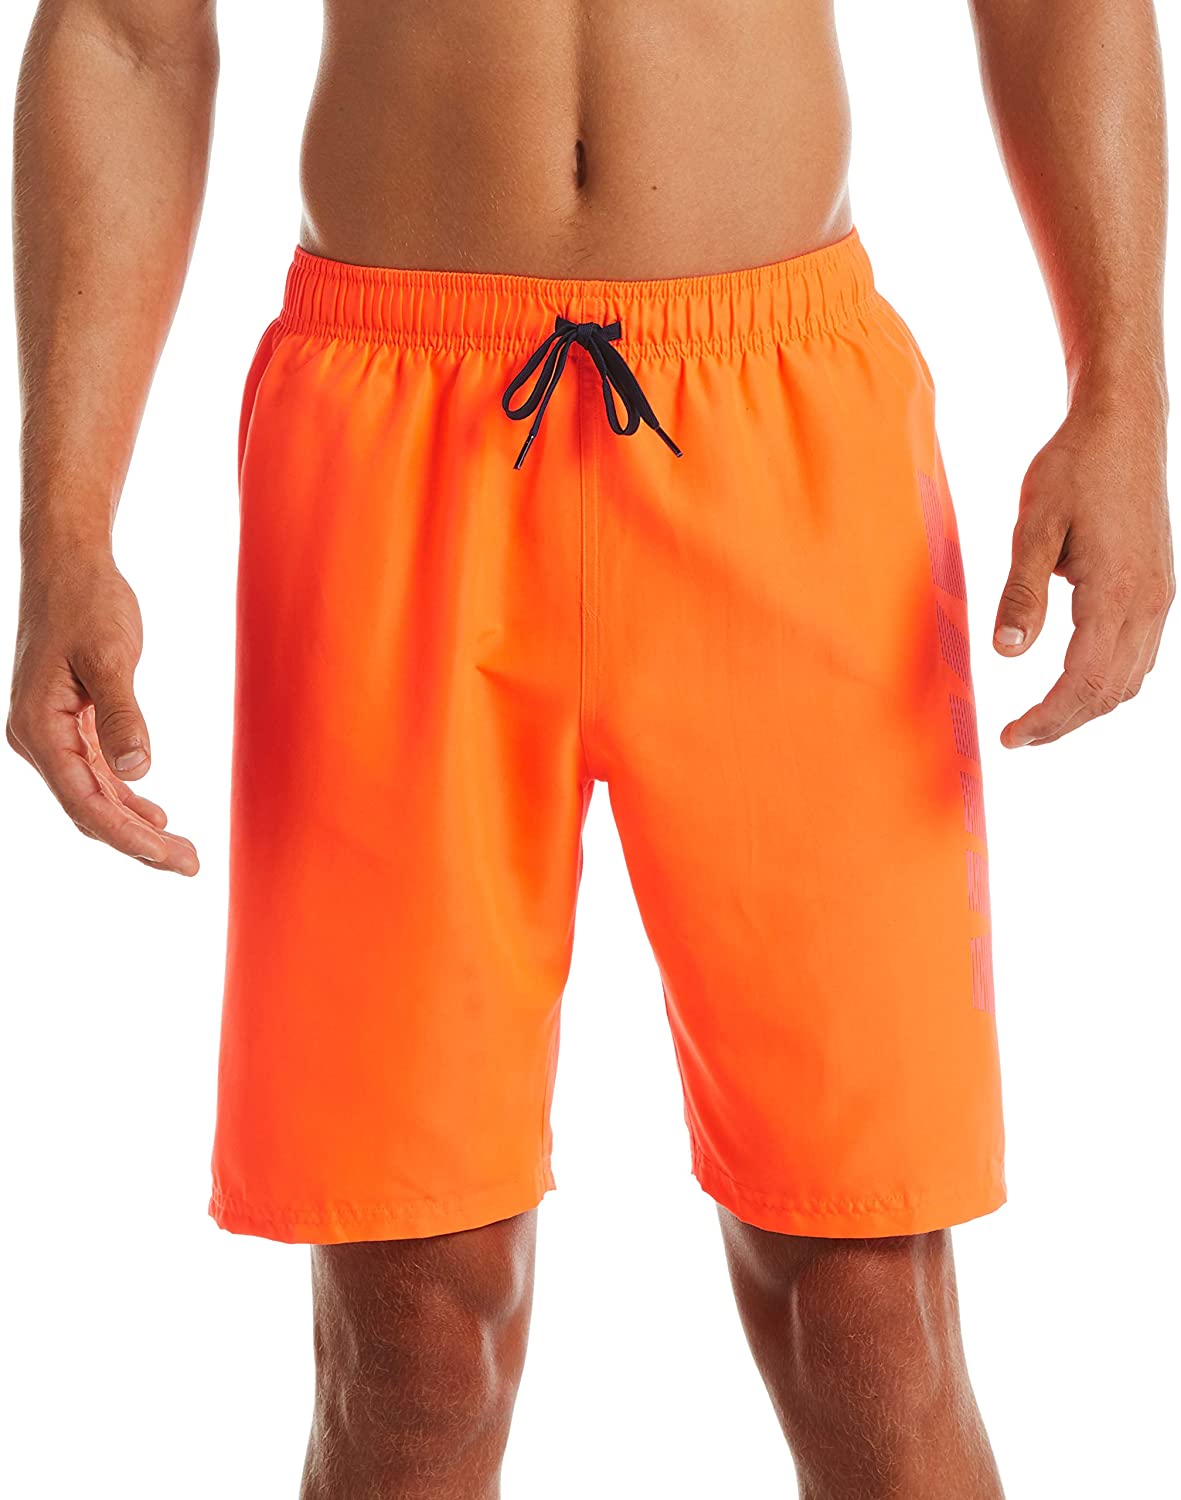 Men's Nike Logo Volley Short Swim Trunk in Total Orange color from the front